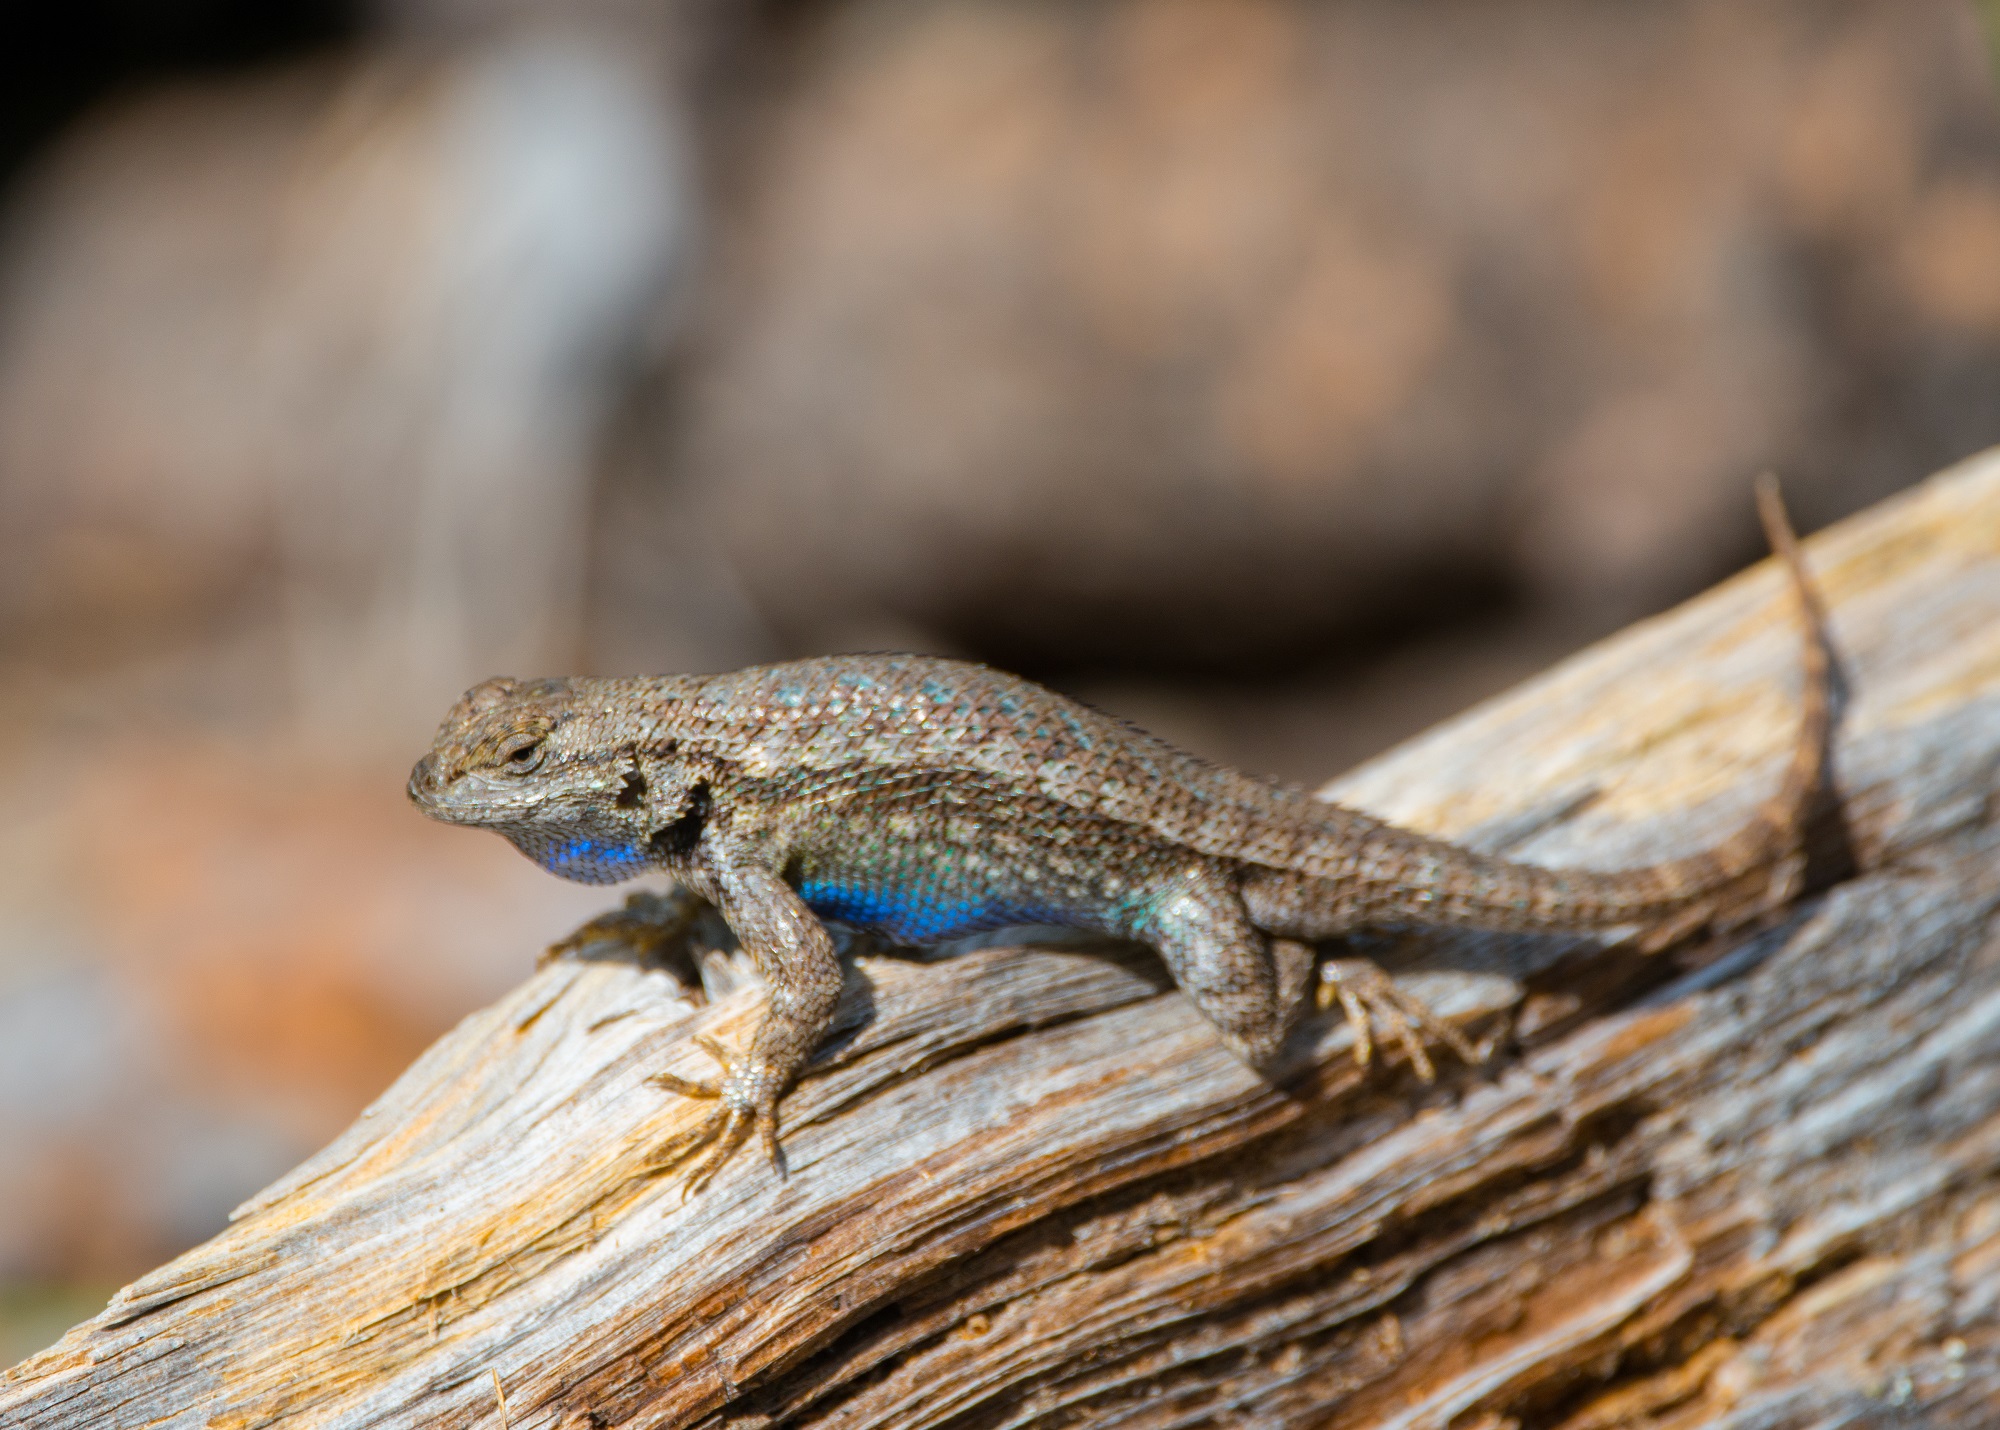 What are Those Blue-Bellied Lizards? — Deschutes Land Trust